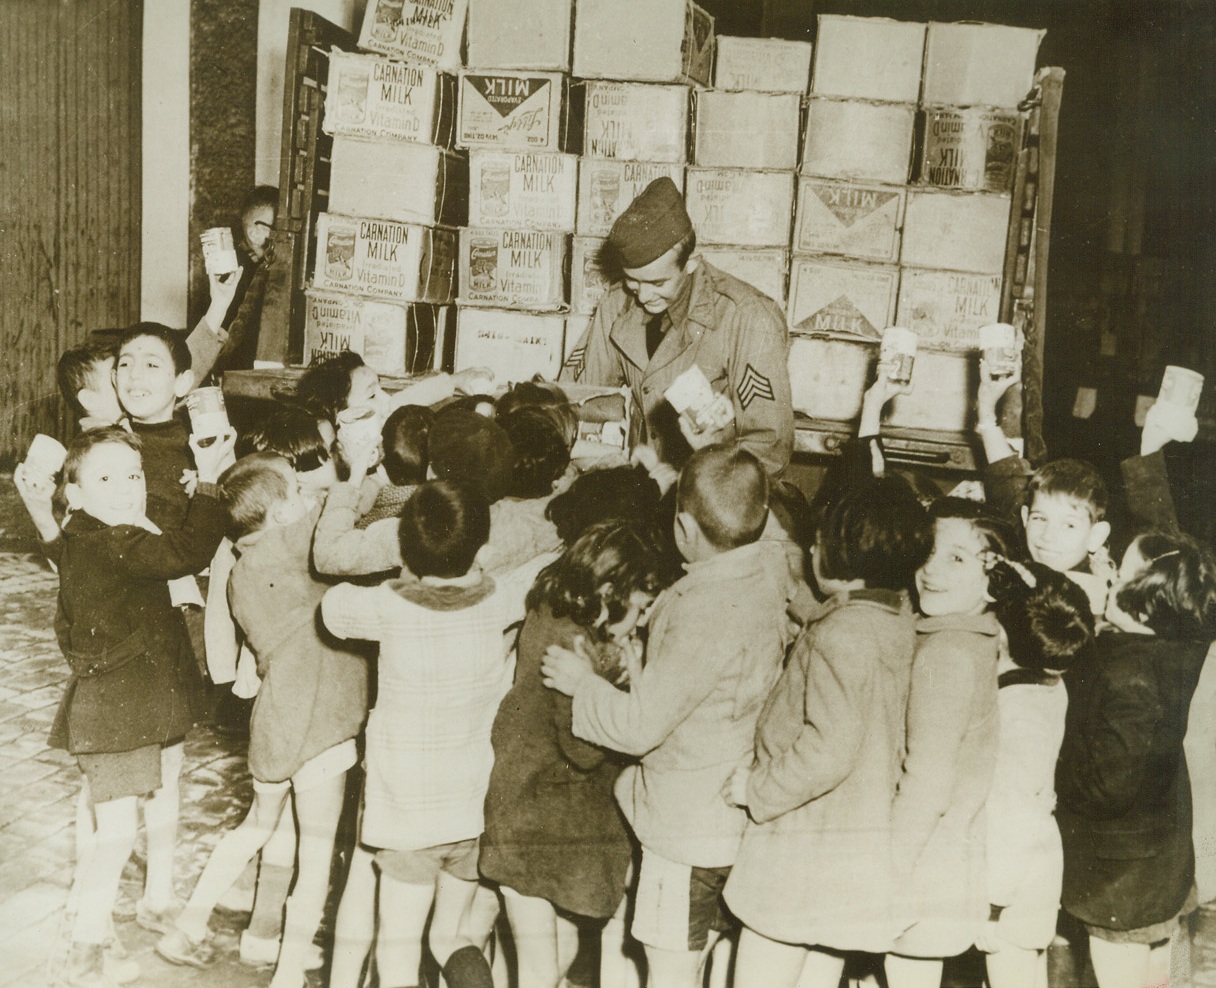 Milk for Children of Oran, 1/14/1943. Oran, Algeria—Eager hands reach for cans of condensed milk, as Sgt. Paul Myers, U.S.A., of Missouri, distributes half the milk ration of U.S. troops in Oran to French children living in the North African town, recently occupied by Anglo-American forces. (Passed by censors) Credit: ACME.;